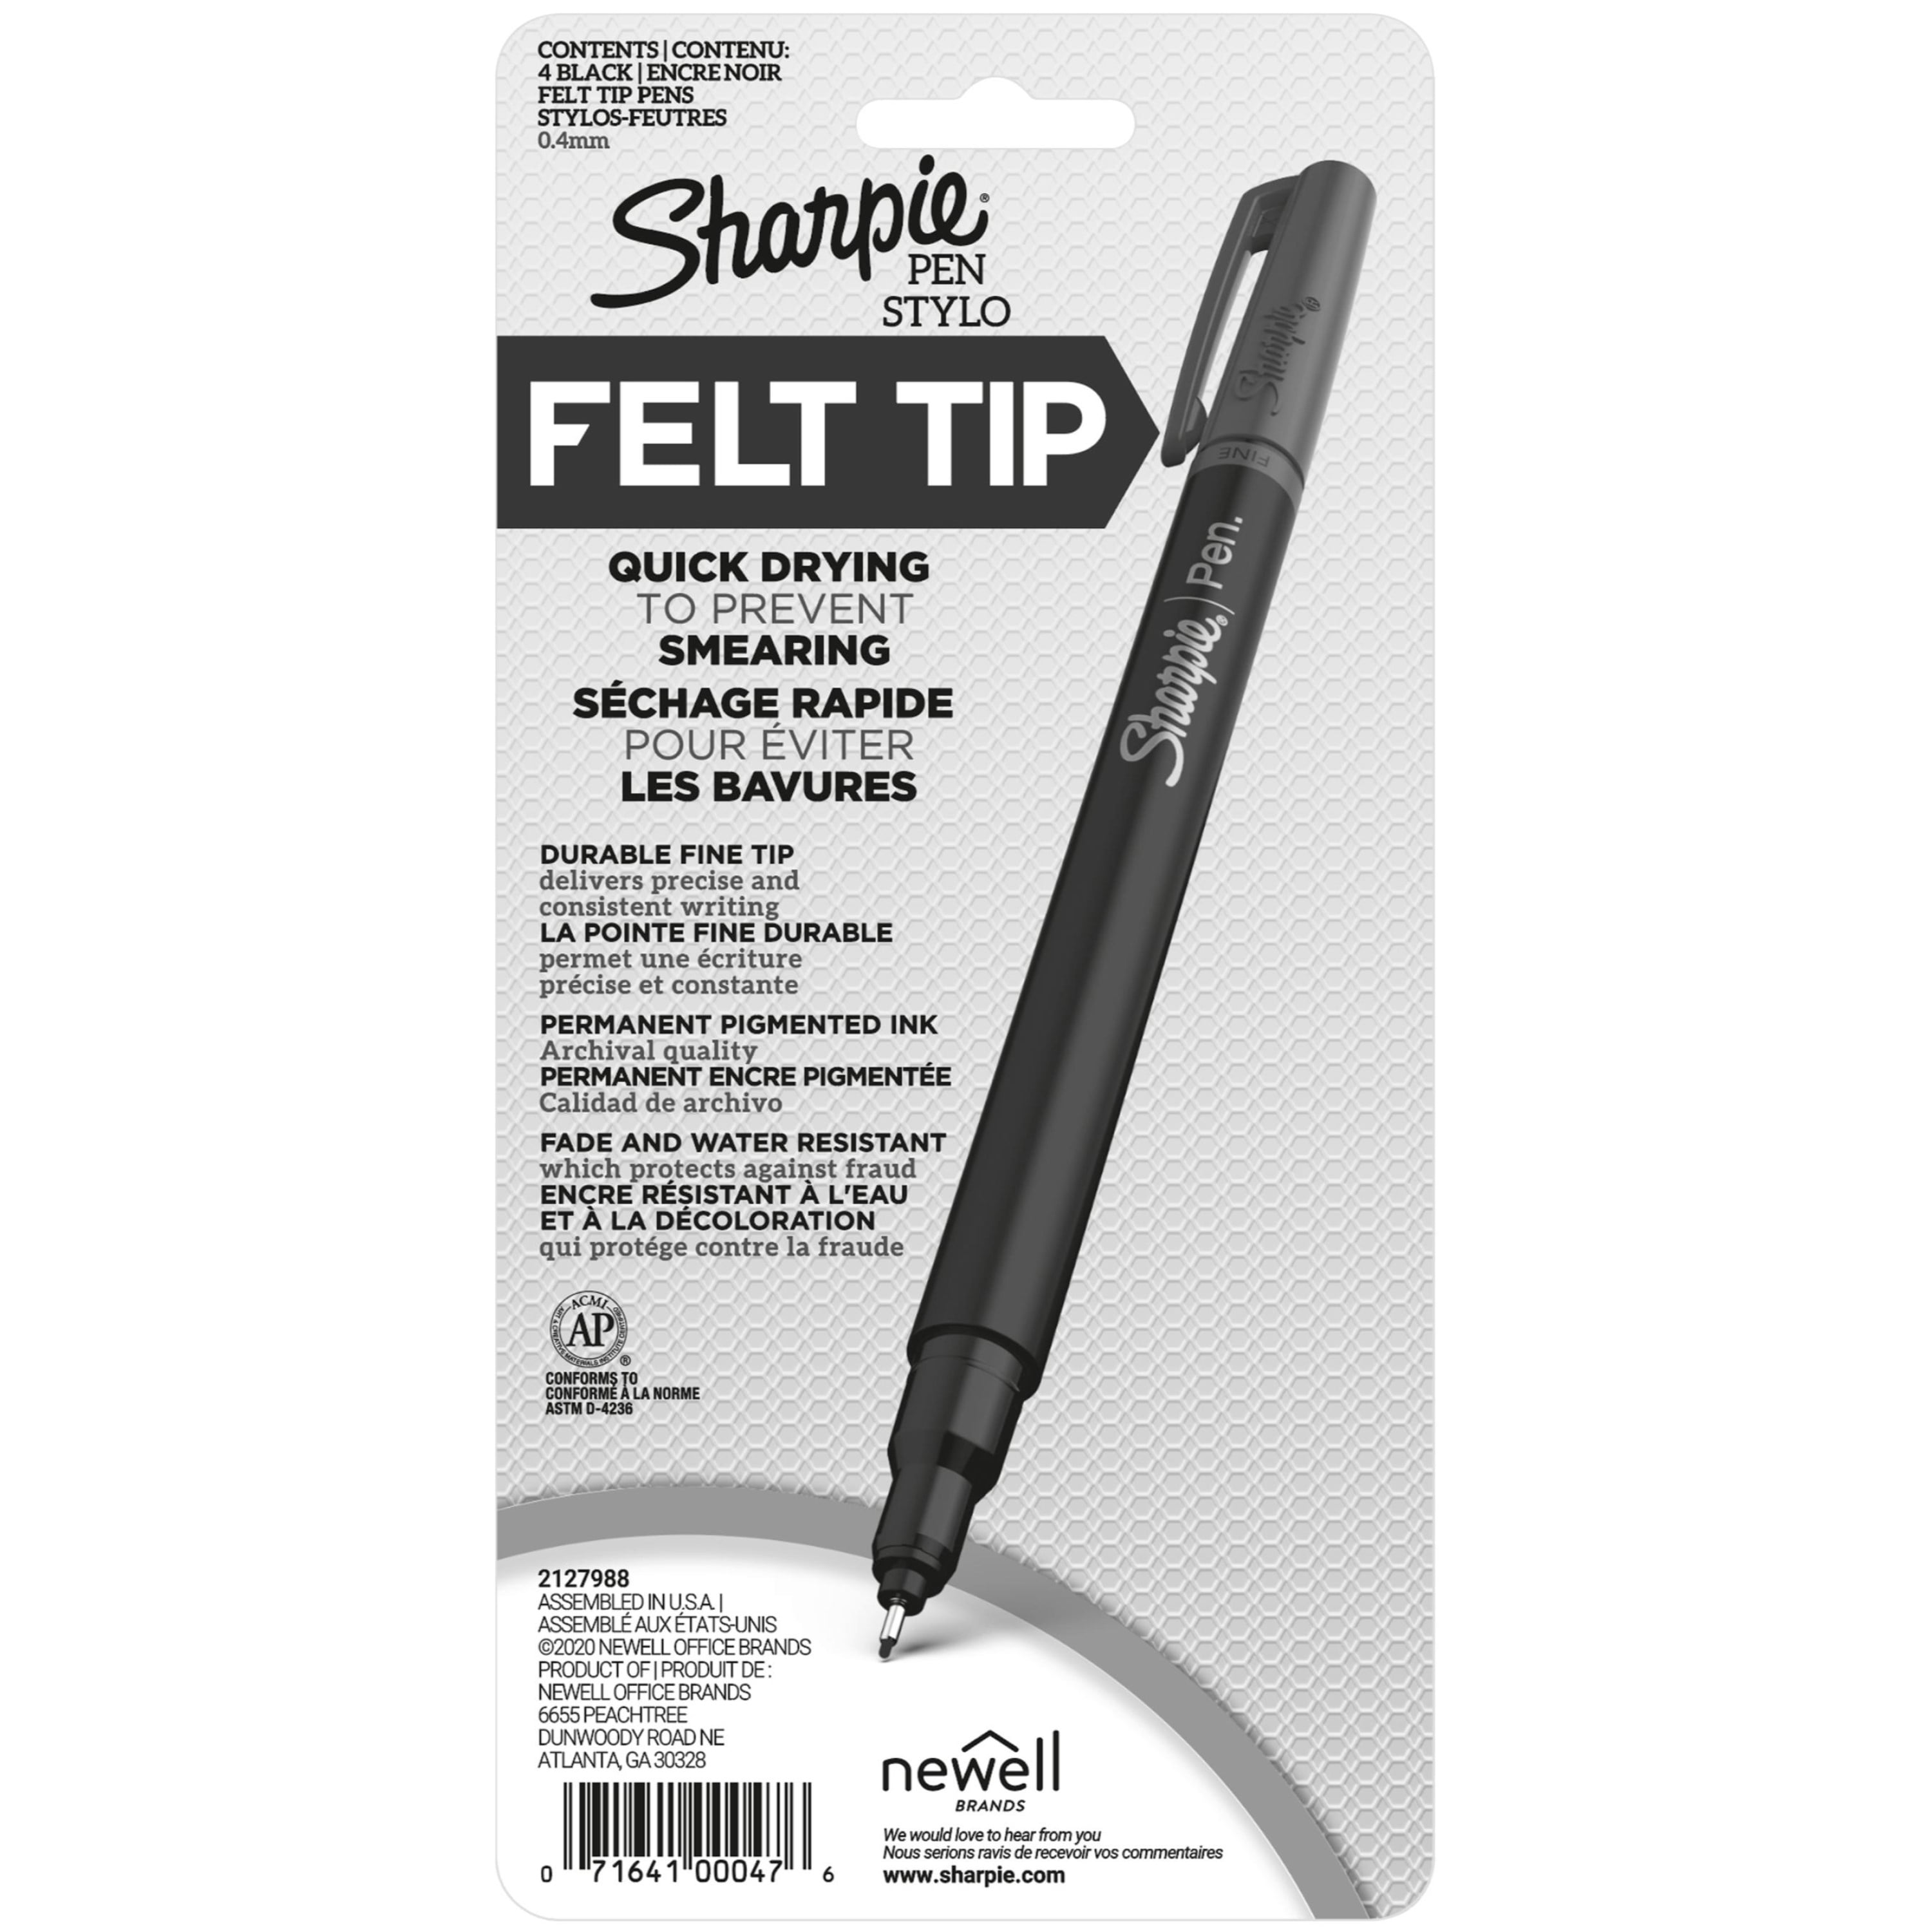 Sharpie 1758055 Grip Pen Black Color AP Certified Fine Tip Fade Resistan Acid-Free and Archival-Quality Pack of 12